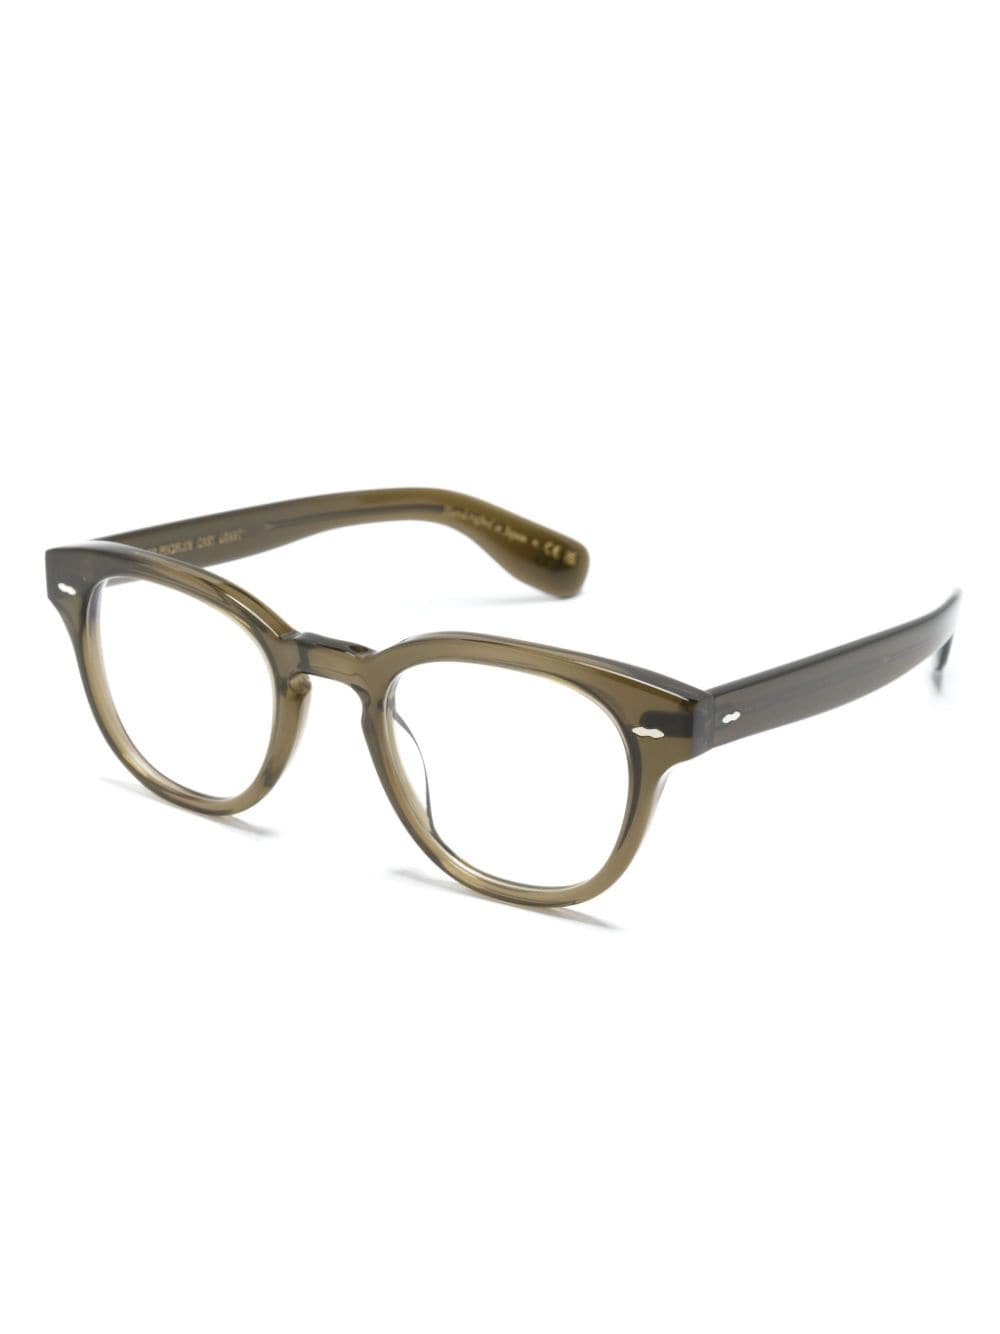 Oliver Peoples Cary Grant zonnebril met rond montuur Bruin